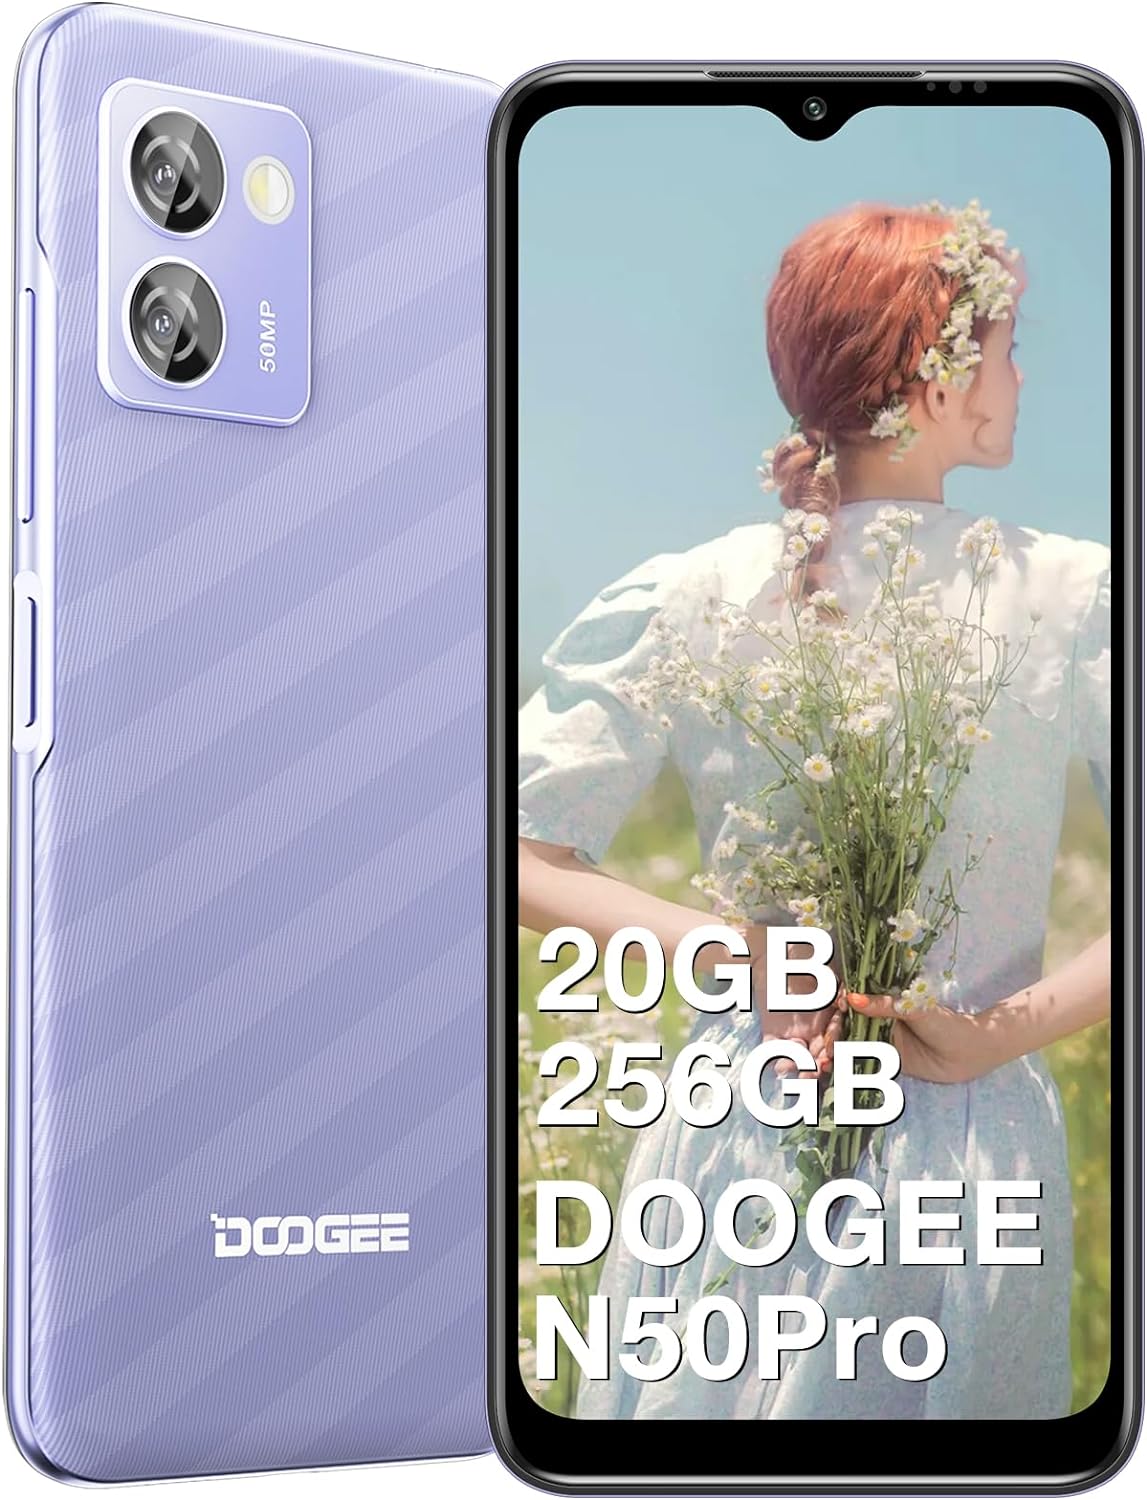 DOOGEE Android 13 Smartphone N50 Pro 6.52'' HD+, Octa Core 20GB + 256GB(Expand 1TB), 4200mAh Battery, 50MP Triple Camera, Dual SIM, Smart PA K9 Amplifier, Face Unlocked Cell Phone (Purple)